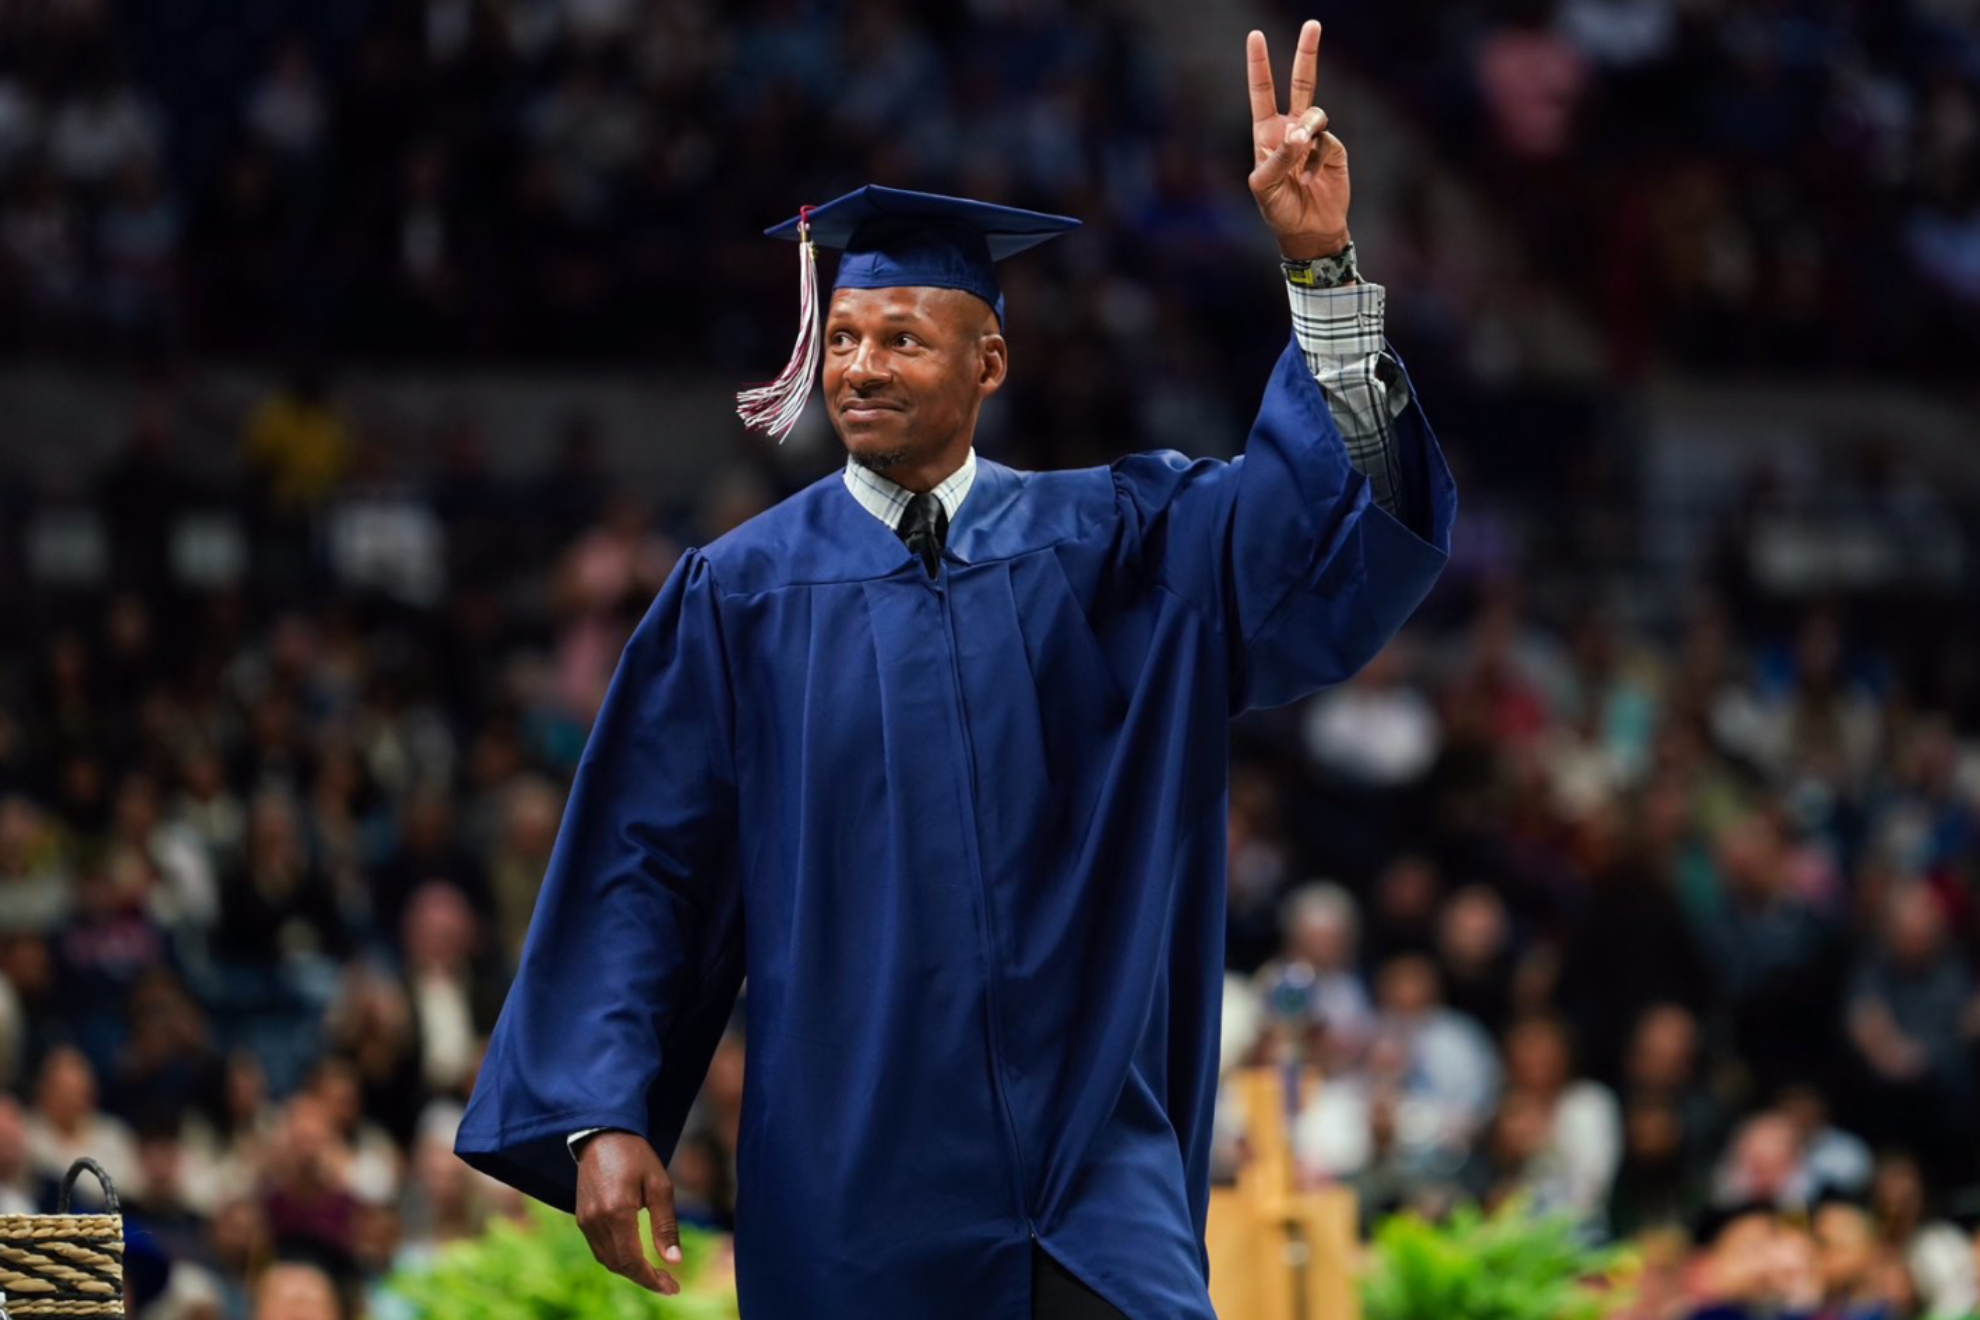 Ray Allen has graduated from the University of Connecticut